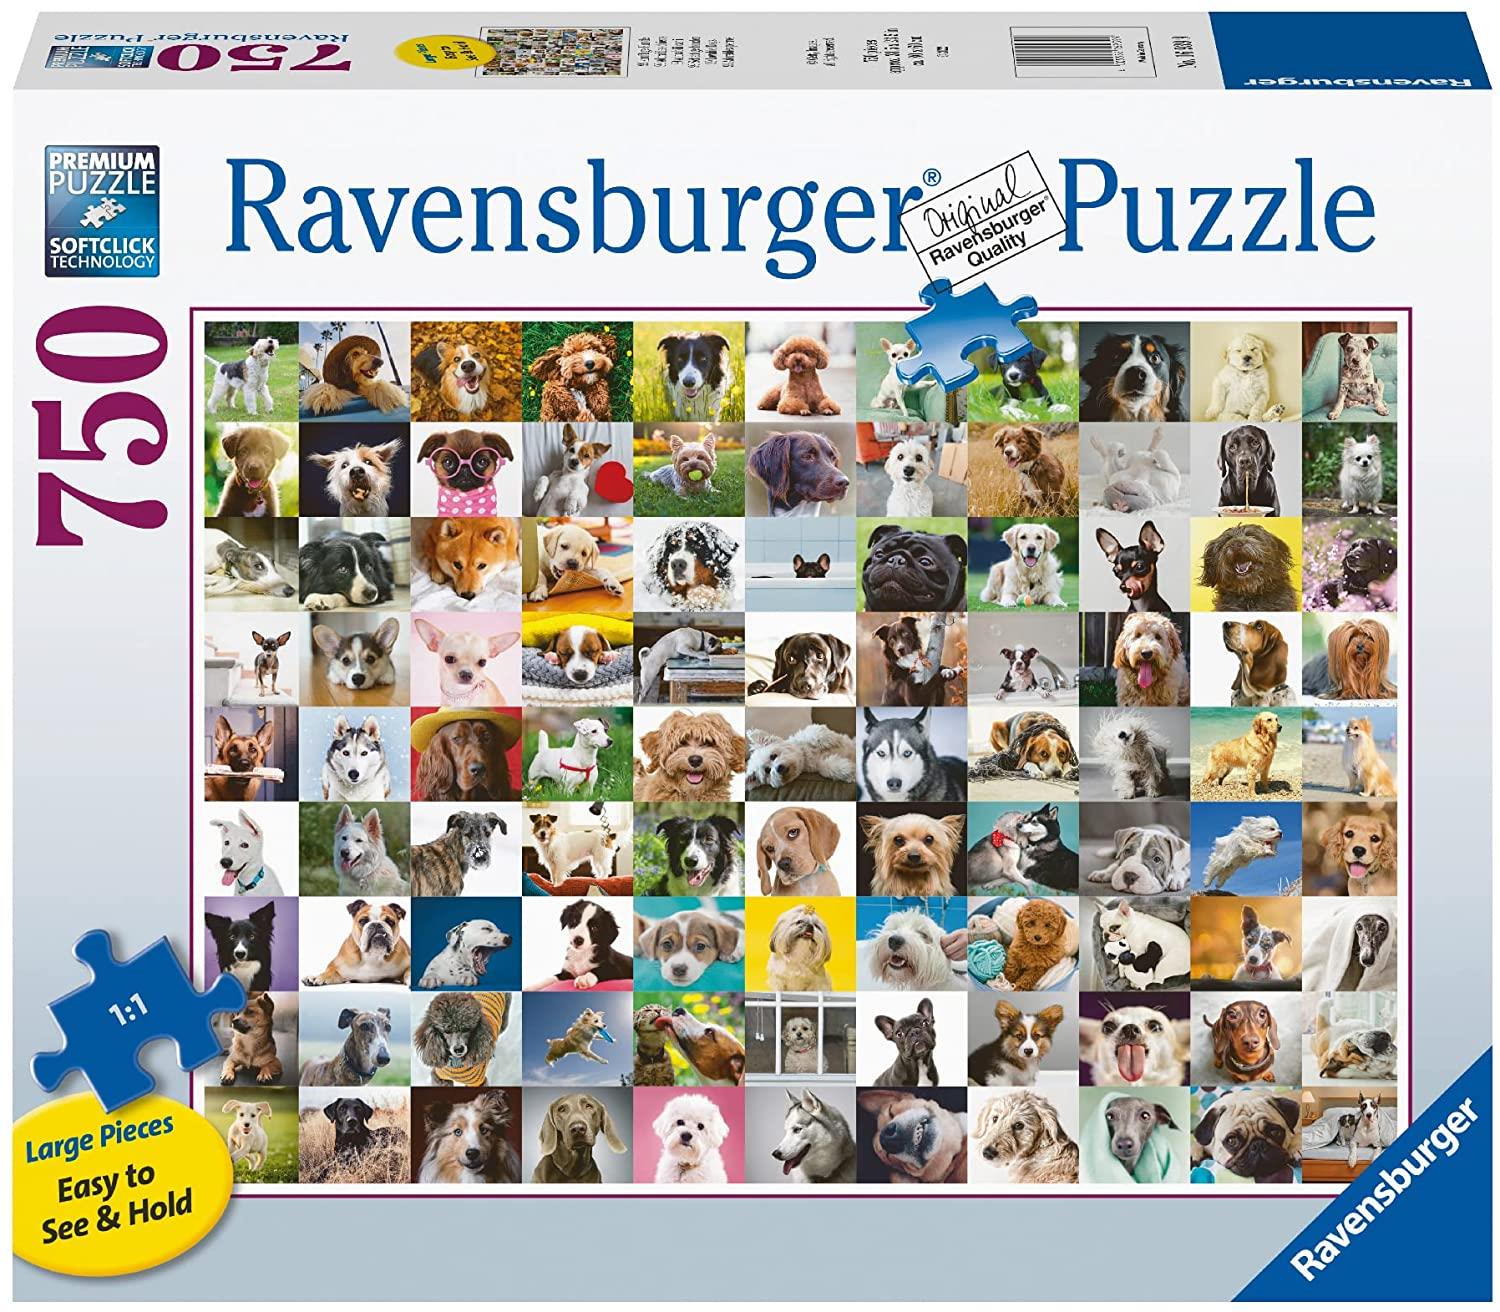 Ravensburger 99 Lovable Dogs Jigsaw Puzzle (750 XL Extra Large Pieces)